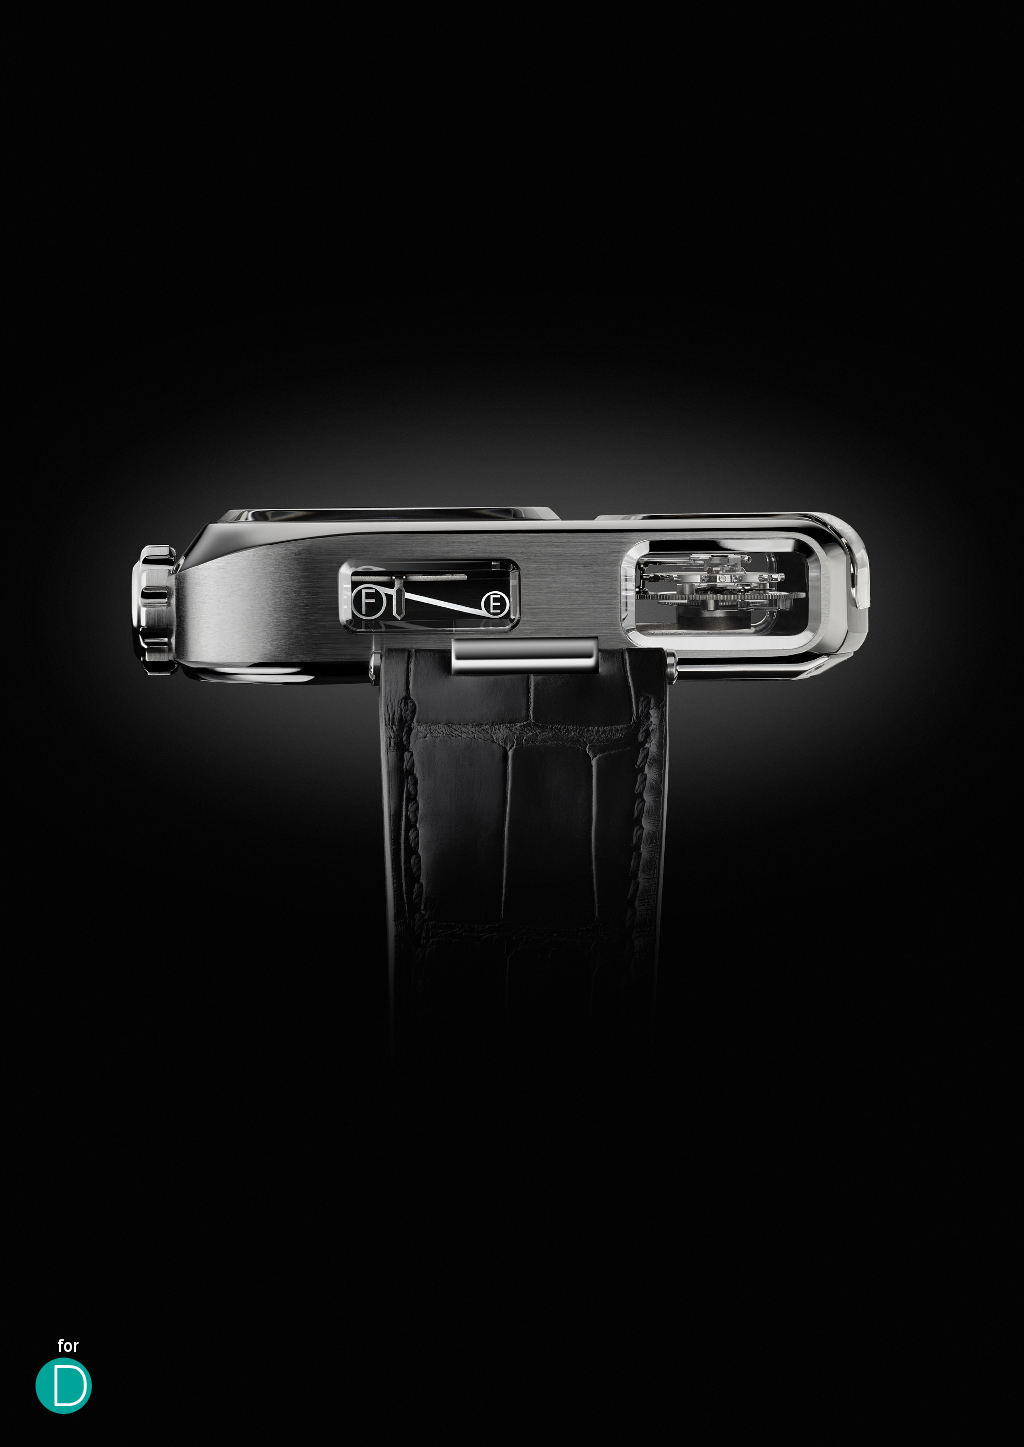 The linear power reserve of the watch is subtly tucked at the side of the watch case. 